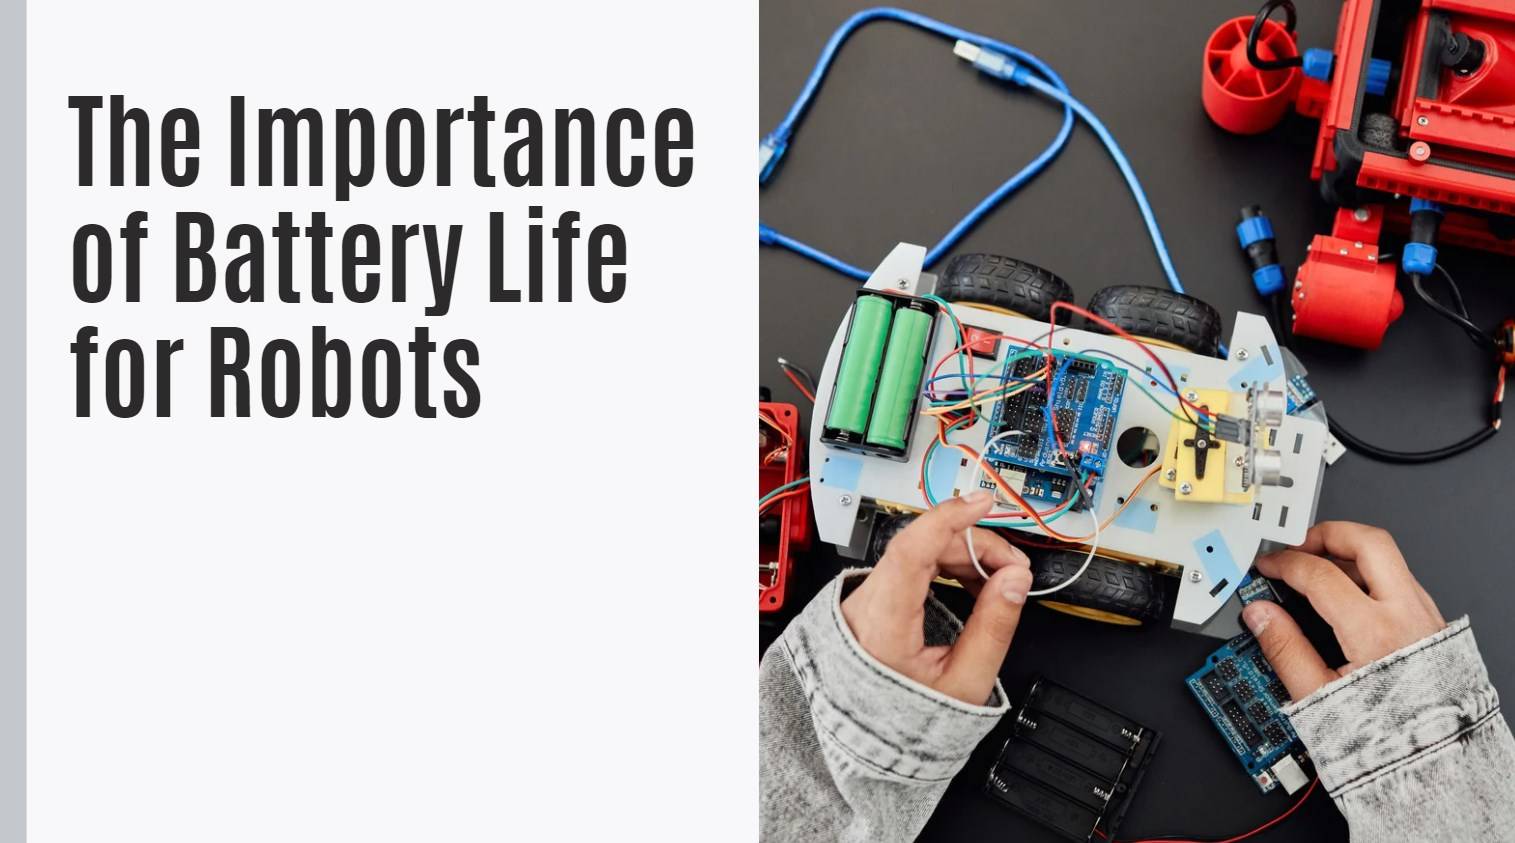 The Importance of Battery Life for Robots. How Long Can A Robot Battery Last?